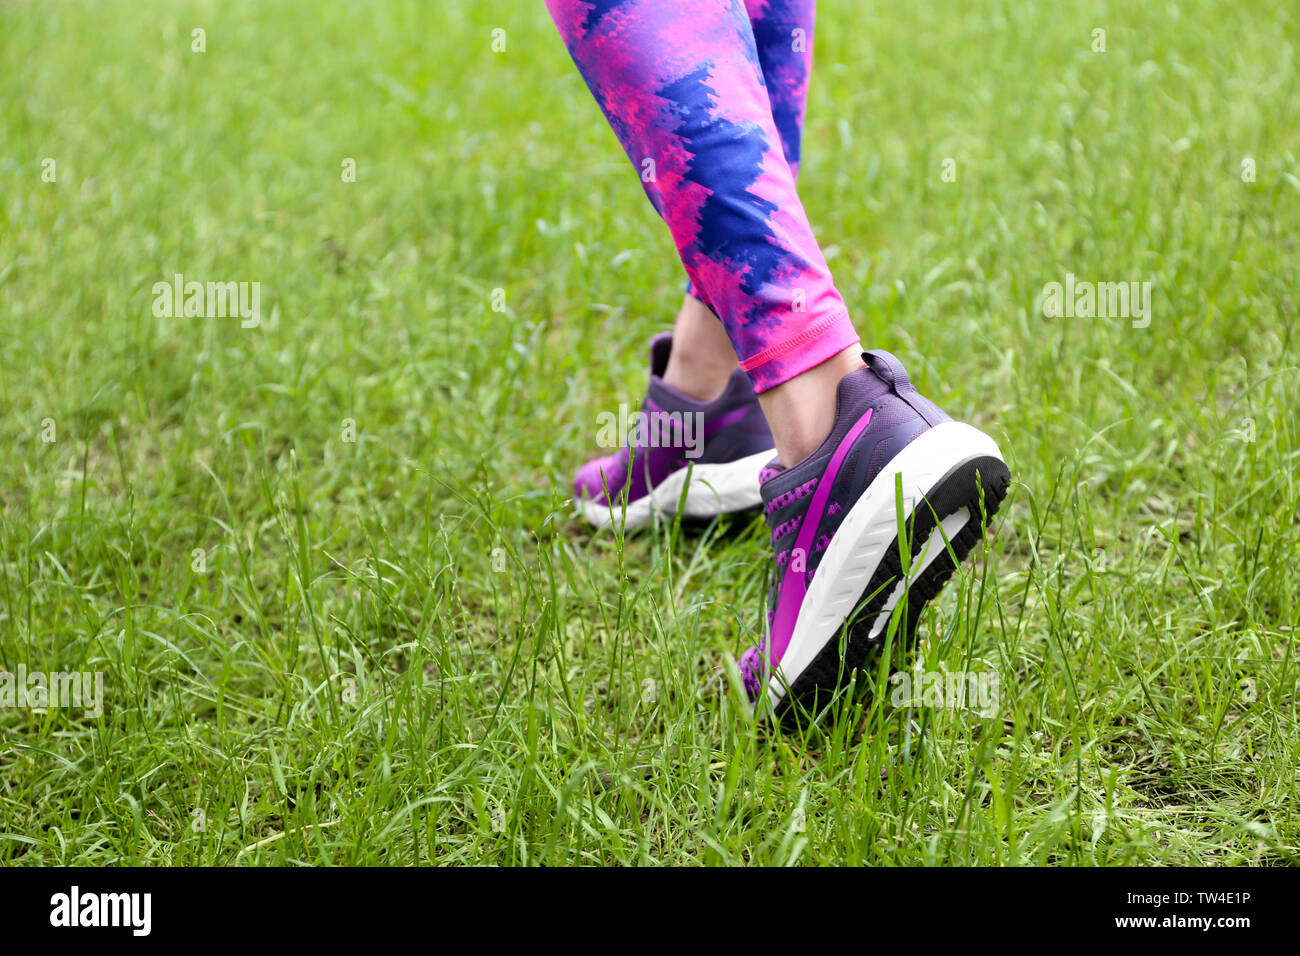 Female legs in leggings and purple sneakers on green grass Stock Photo